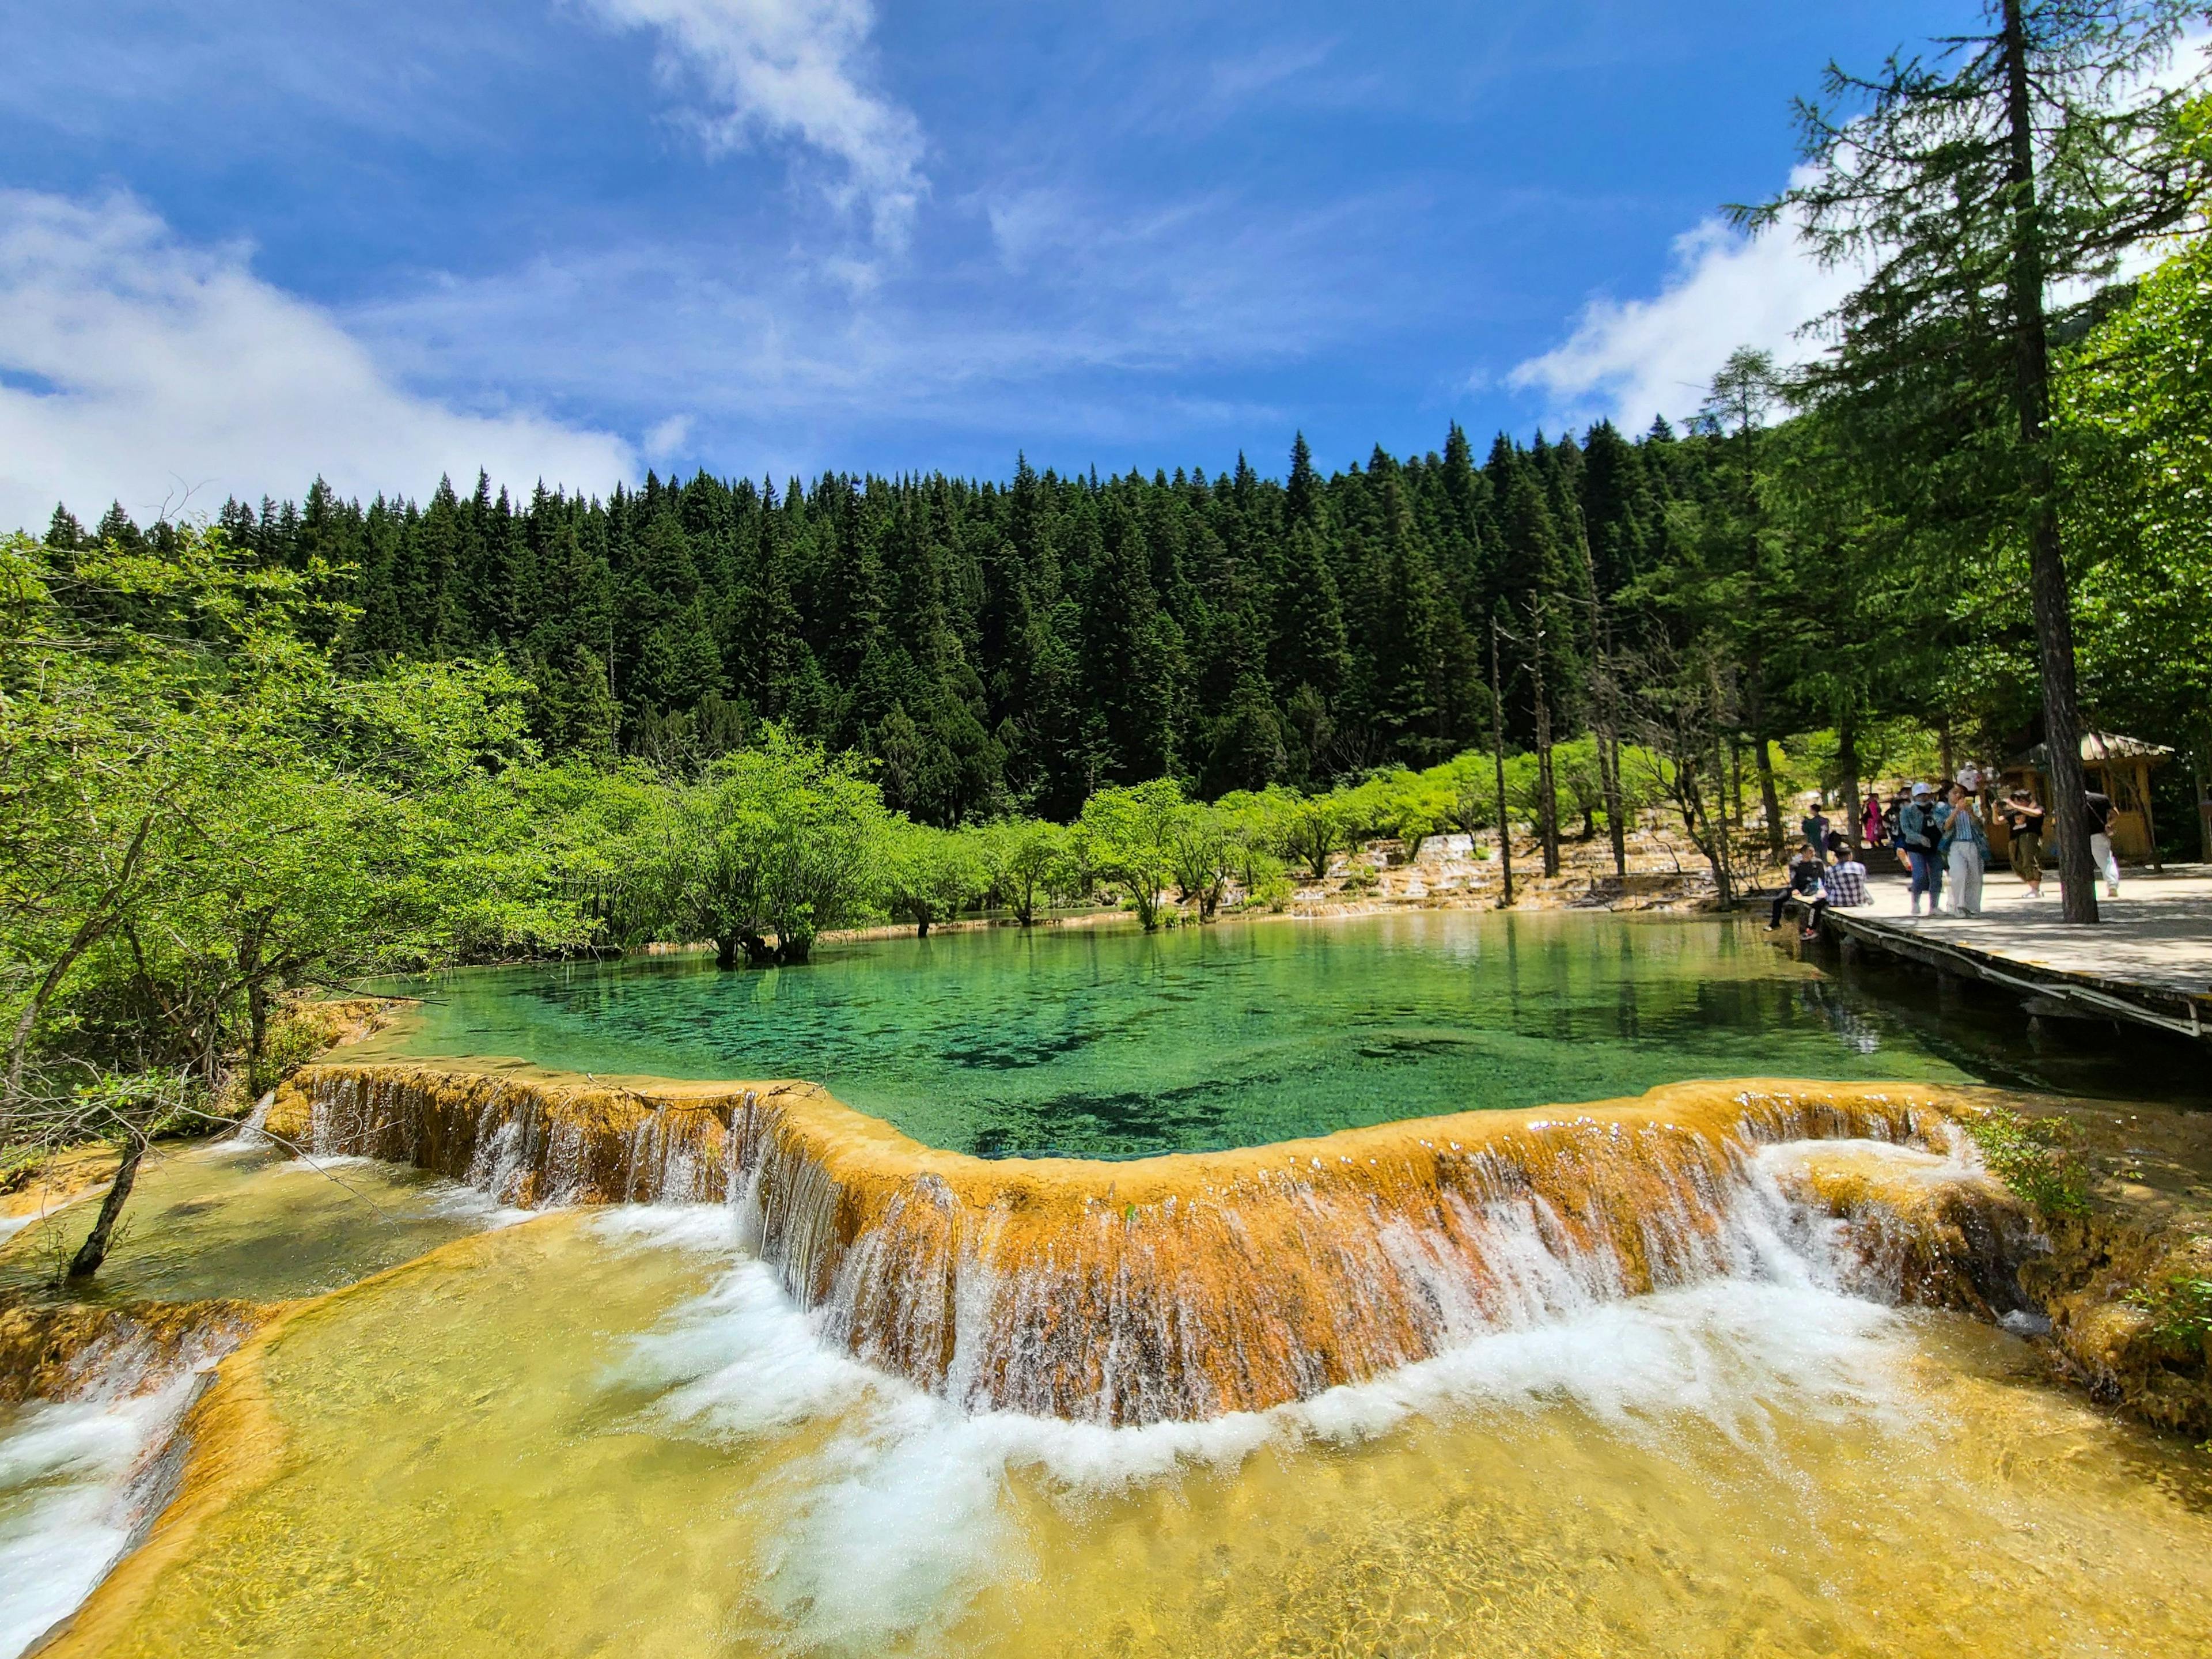 10 Places with the Bluest and Clearest Waters in the World - Jiuzhaigou Valley - ratepunk